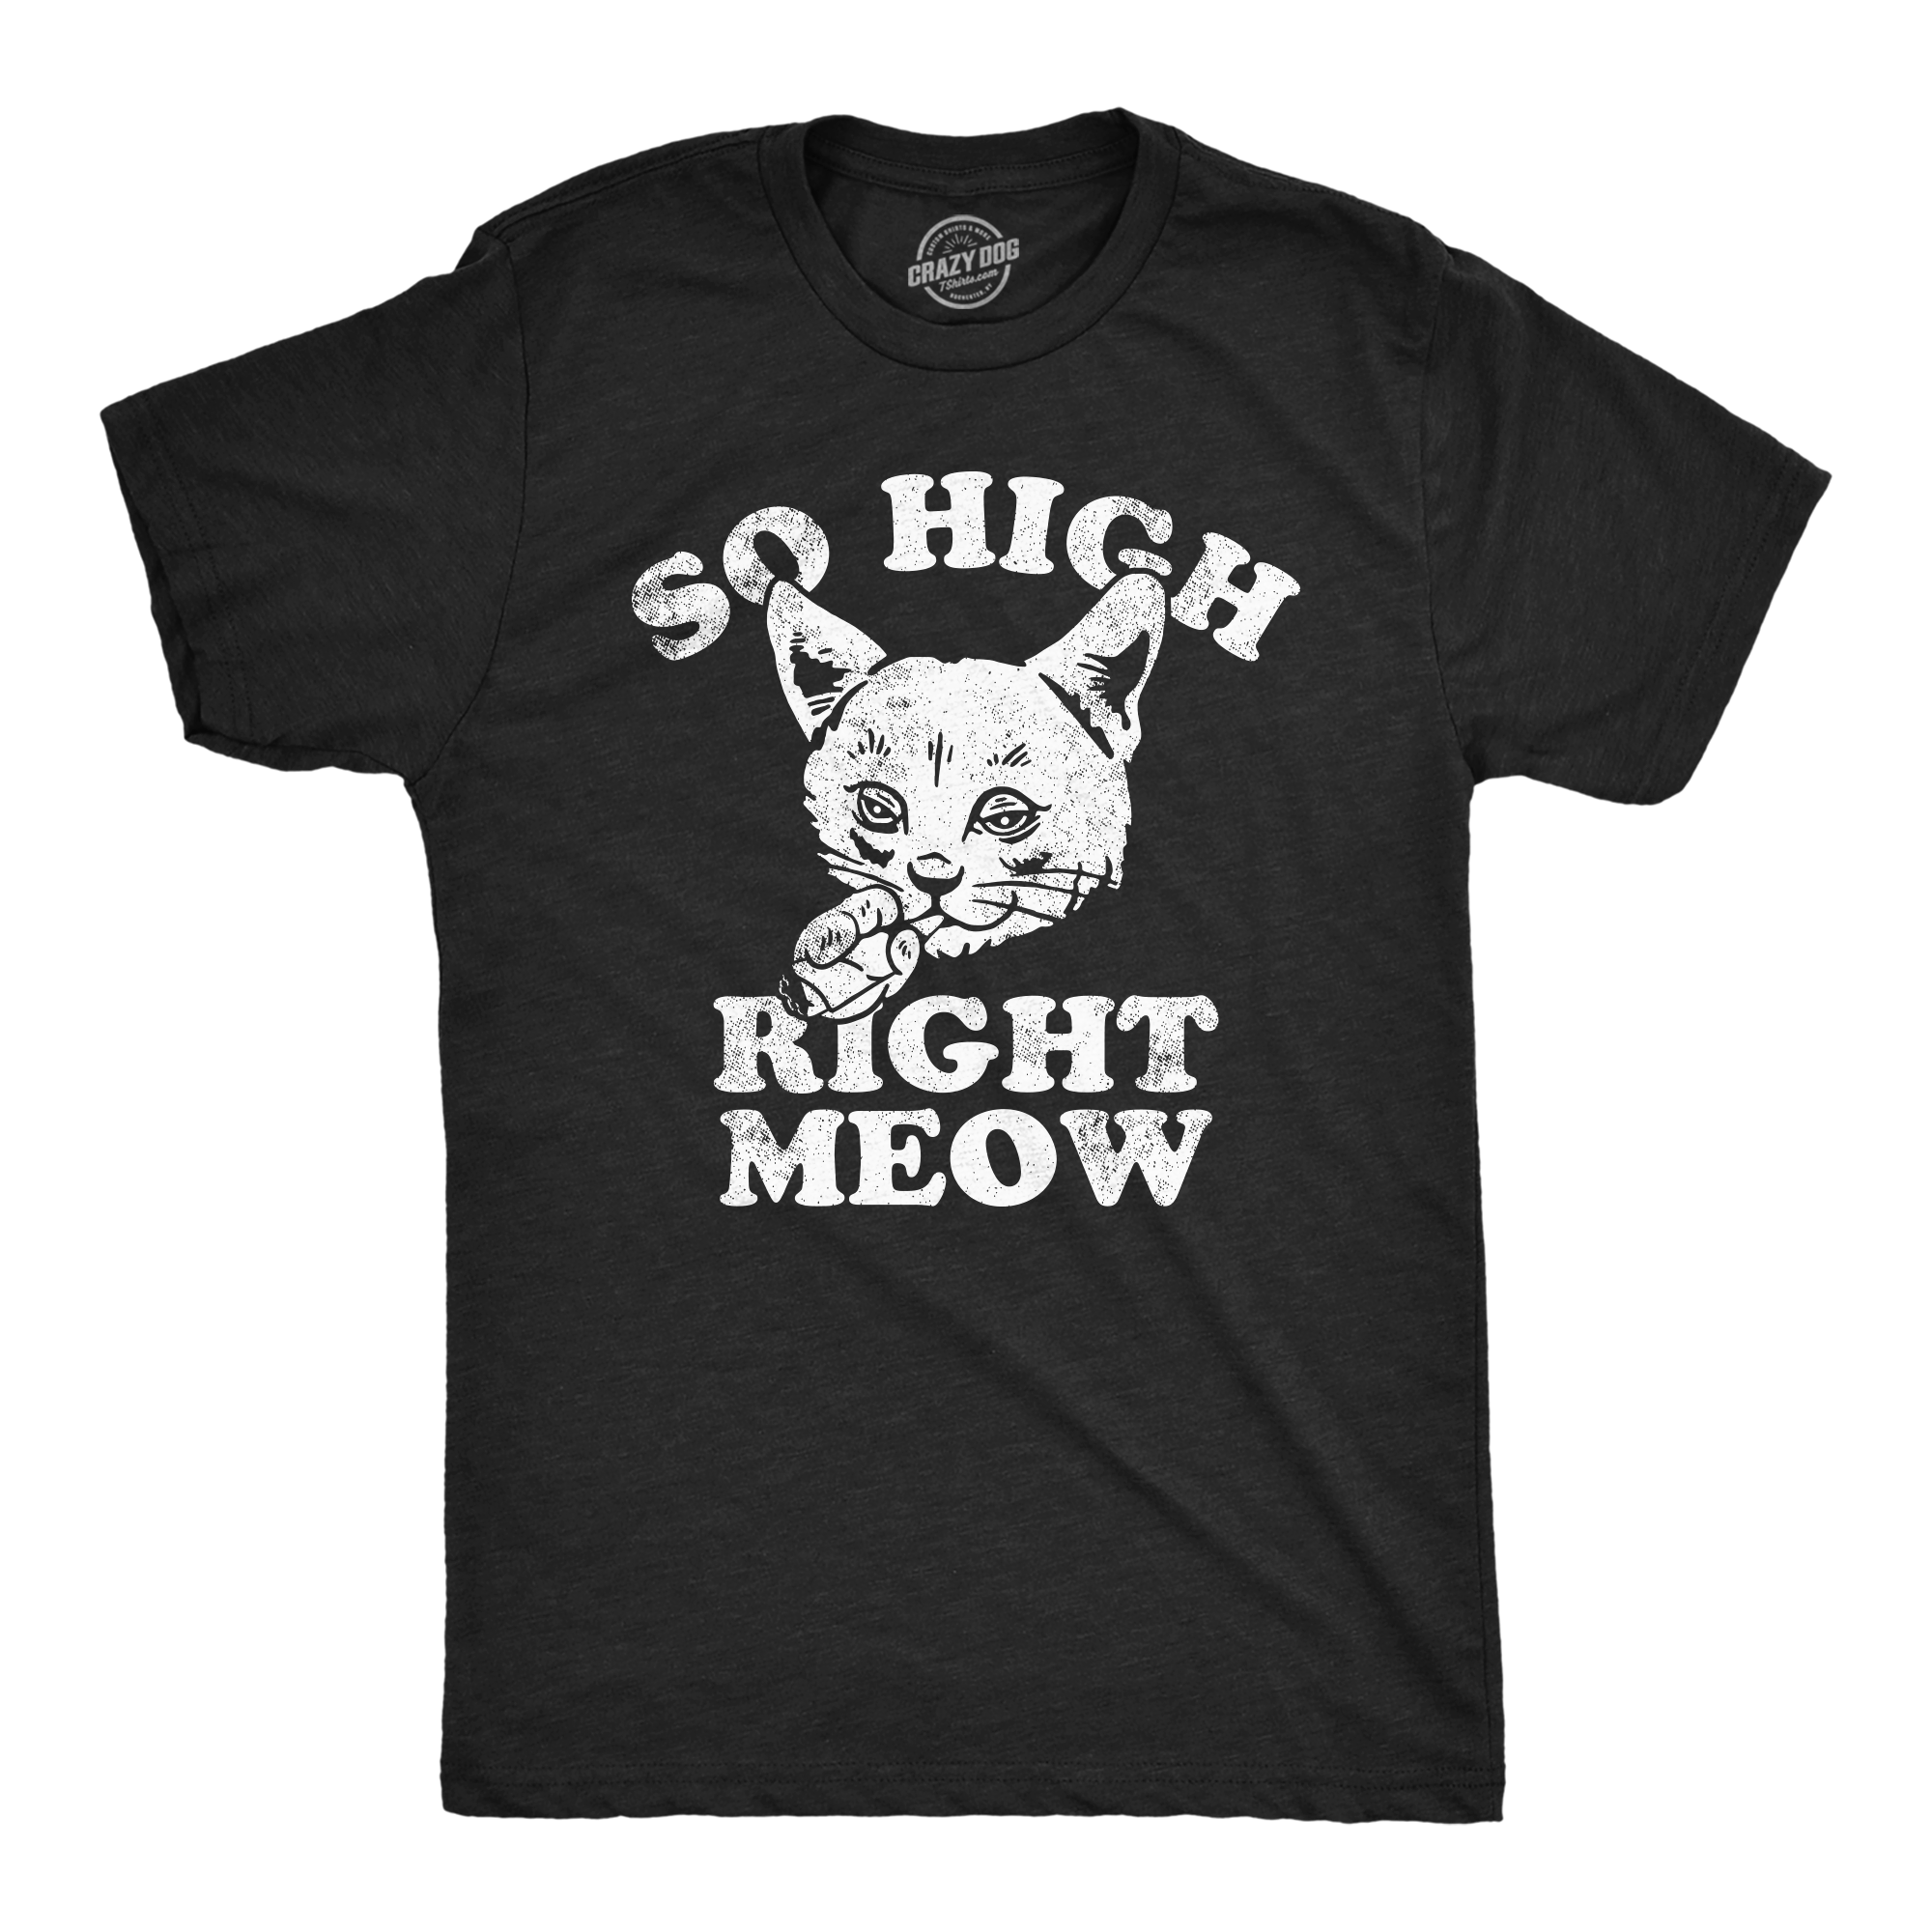 Funny Heather Black - So High Right Meow So High Right Meow Mens T Shirt Nerdy 420 cat sarcastic Tee